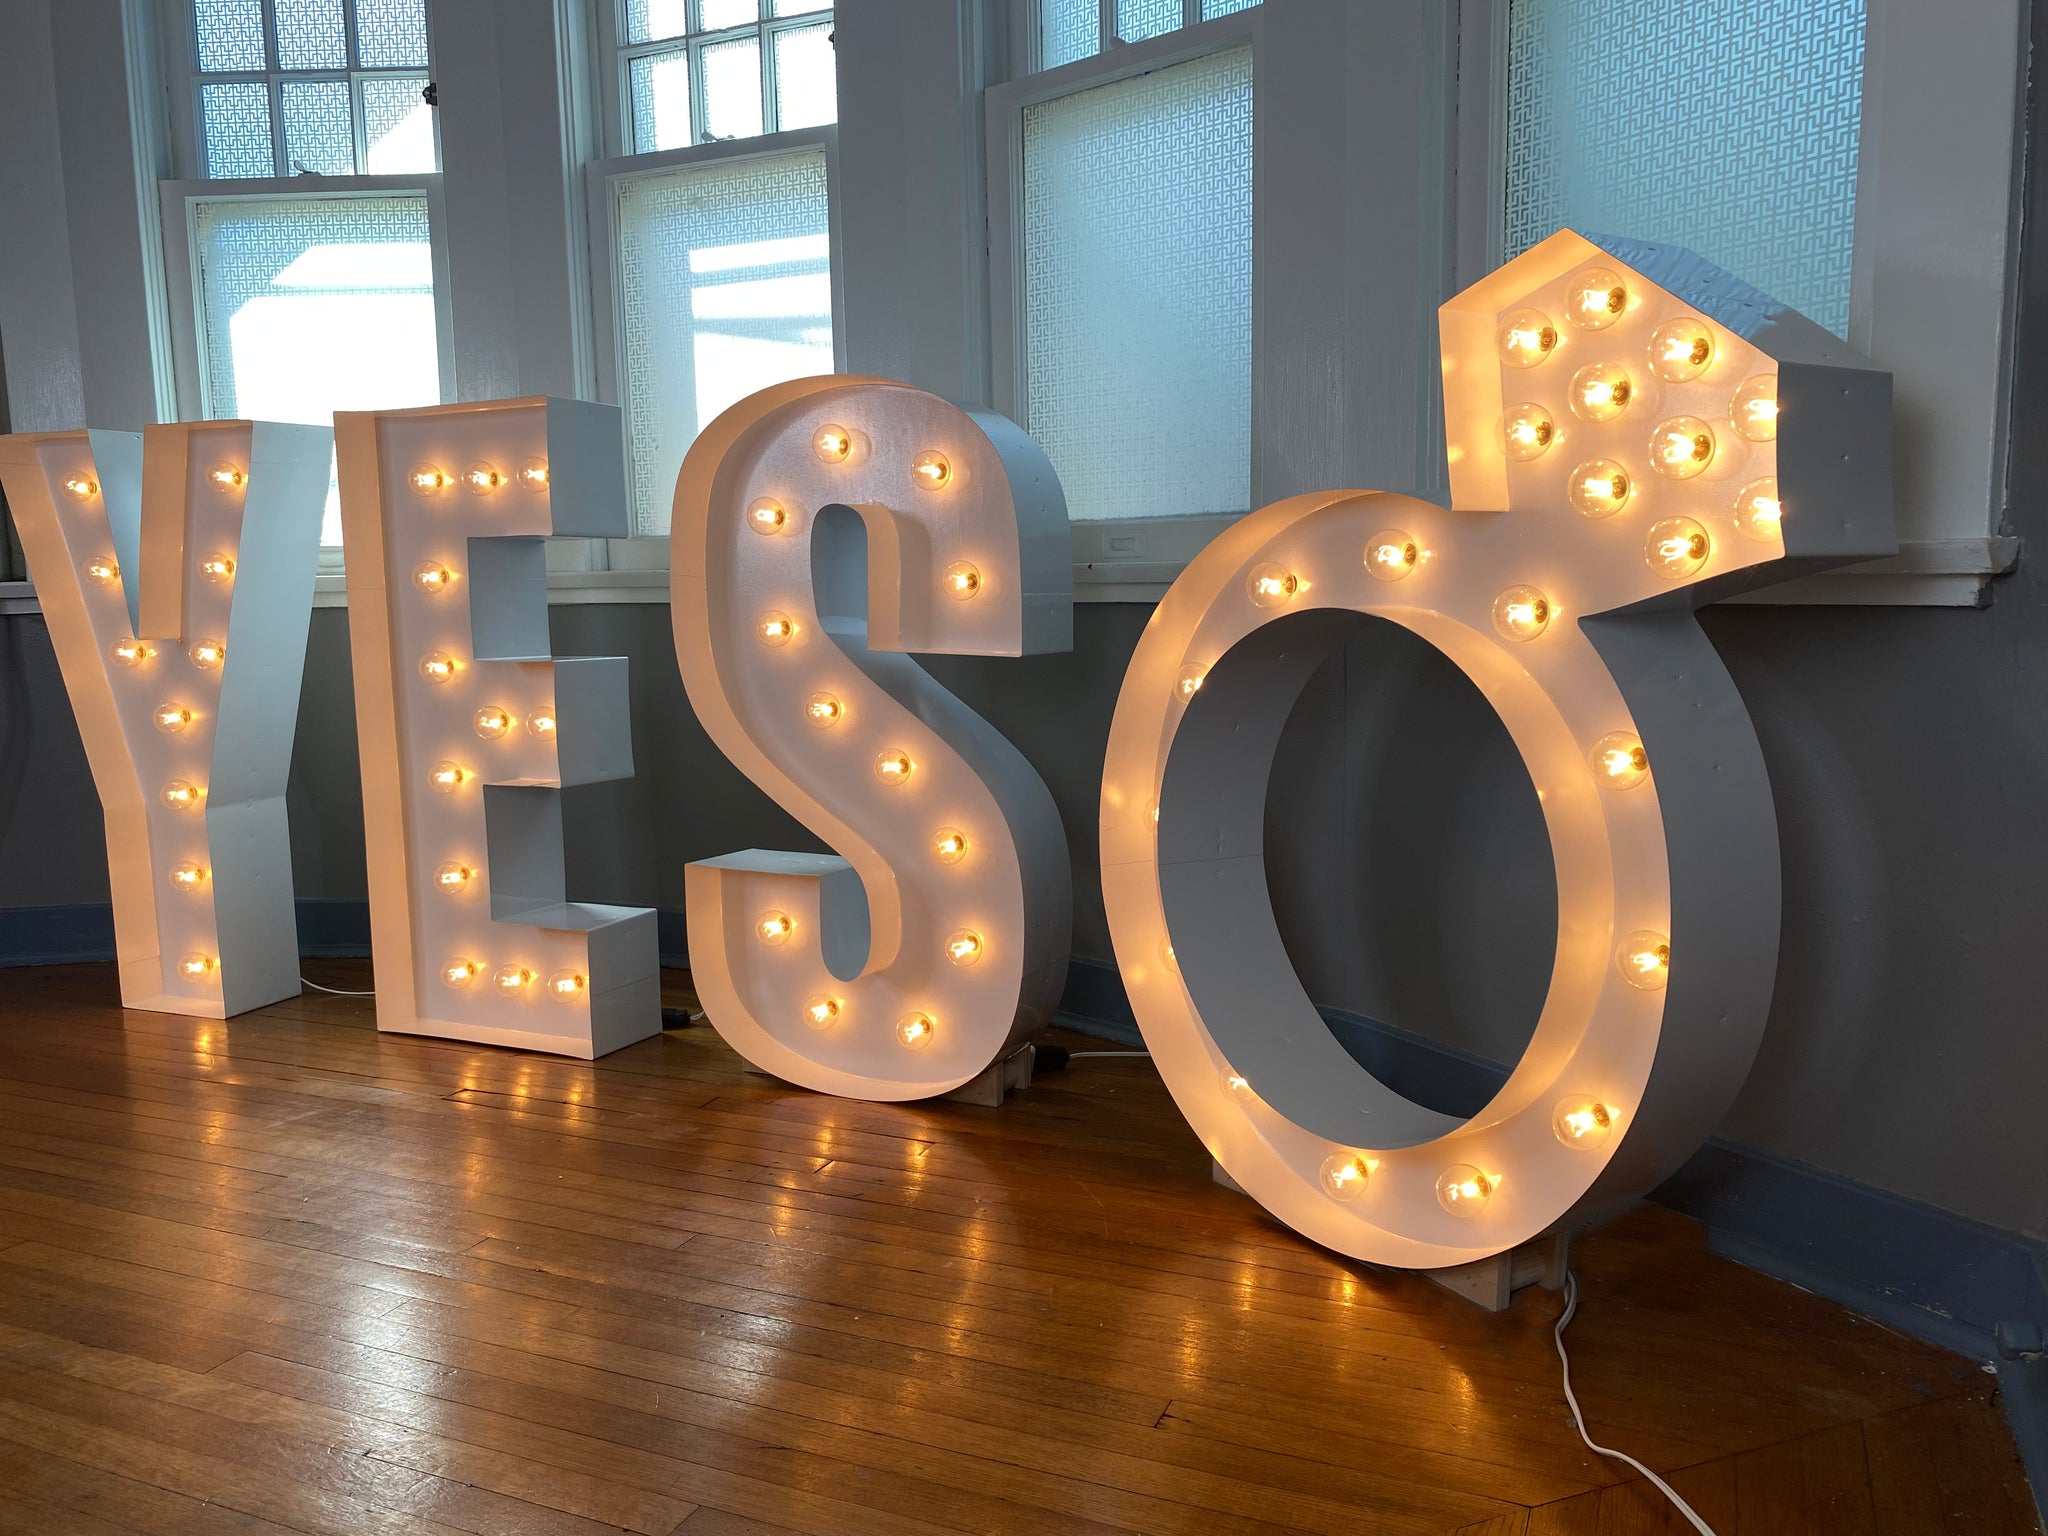 Large Marquee Letters 4ft 5ft tall for Weddings, Proposals, Baby Showers | Large Marquee Ring